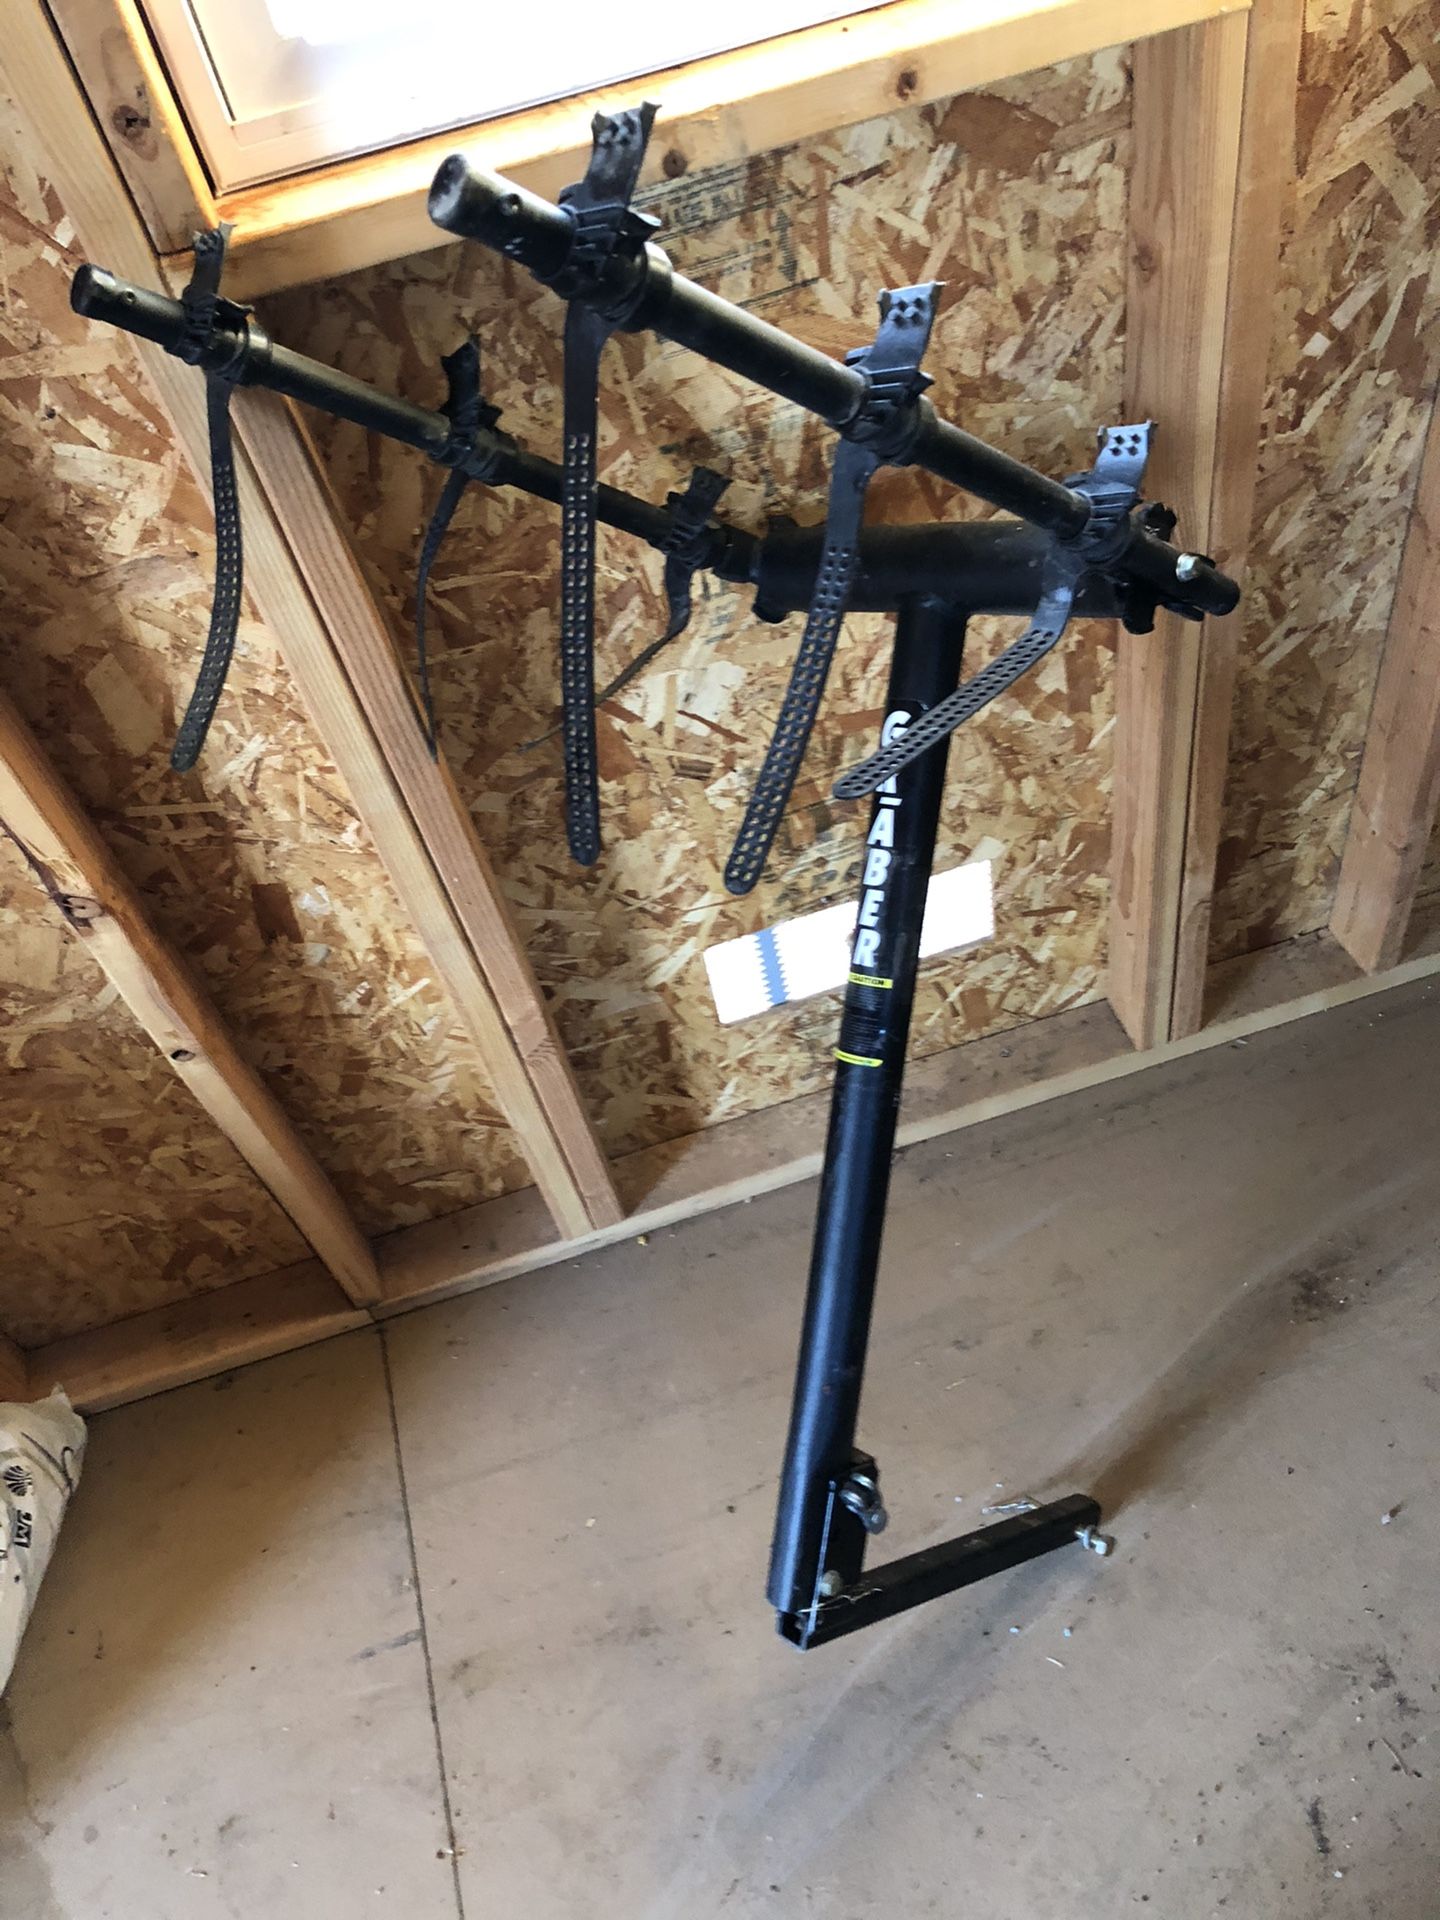 Tow hitch bicycle rack